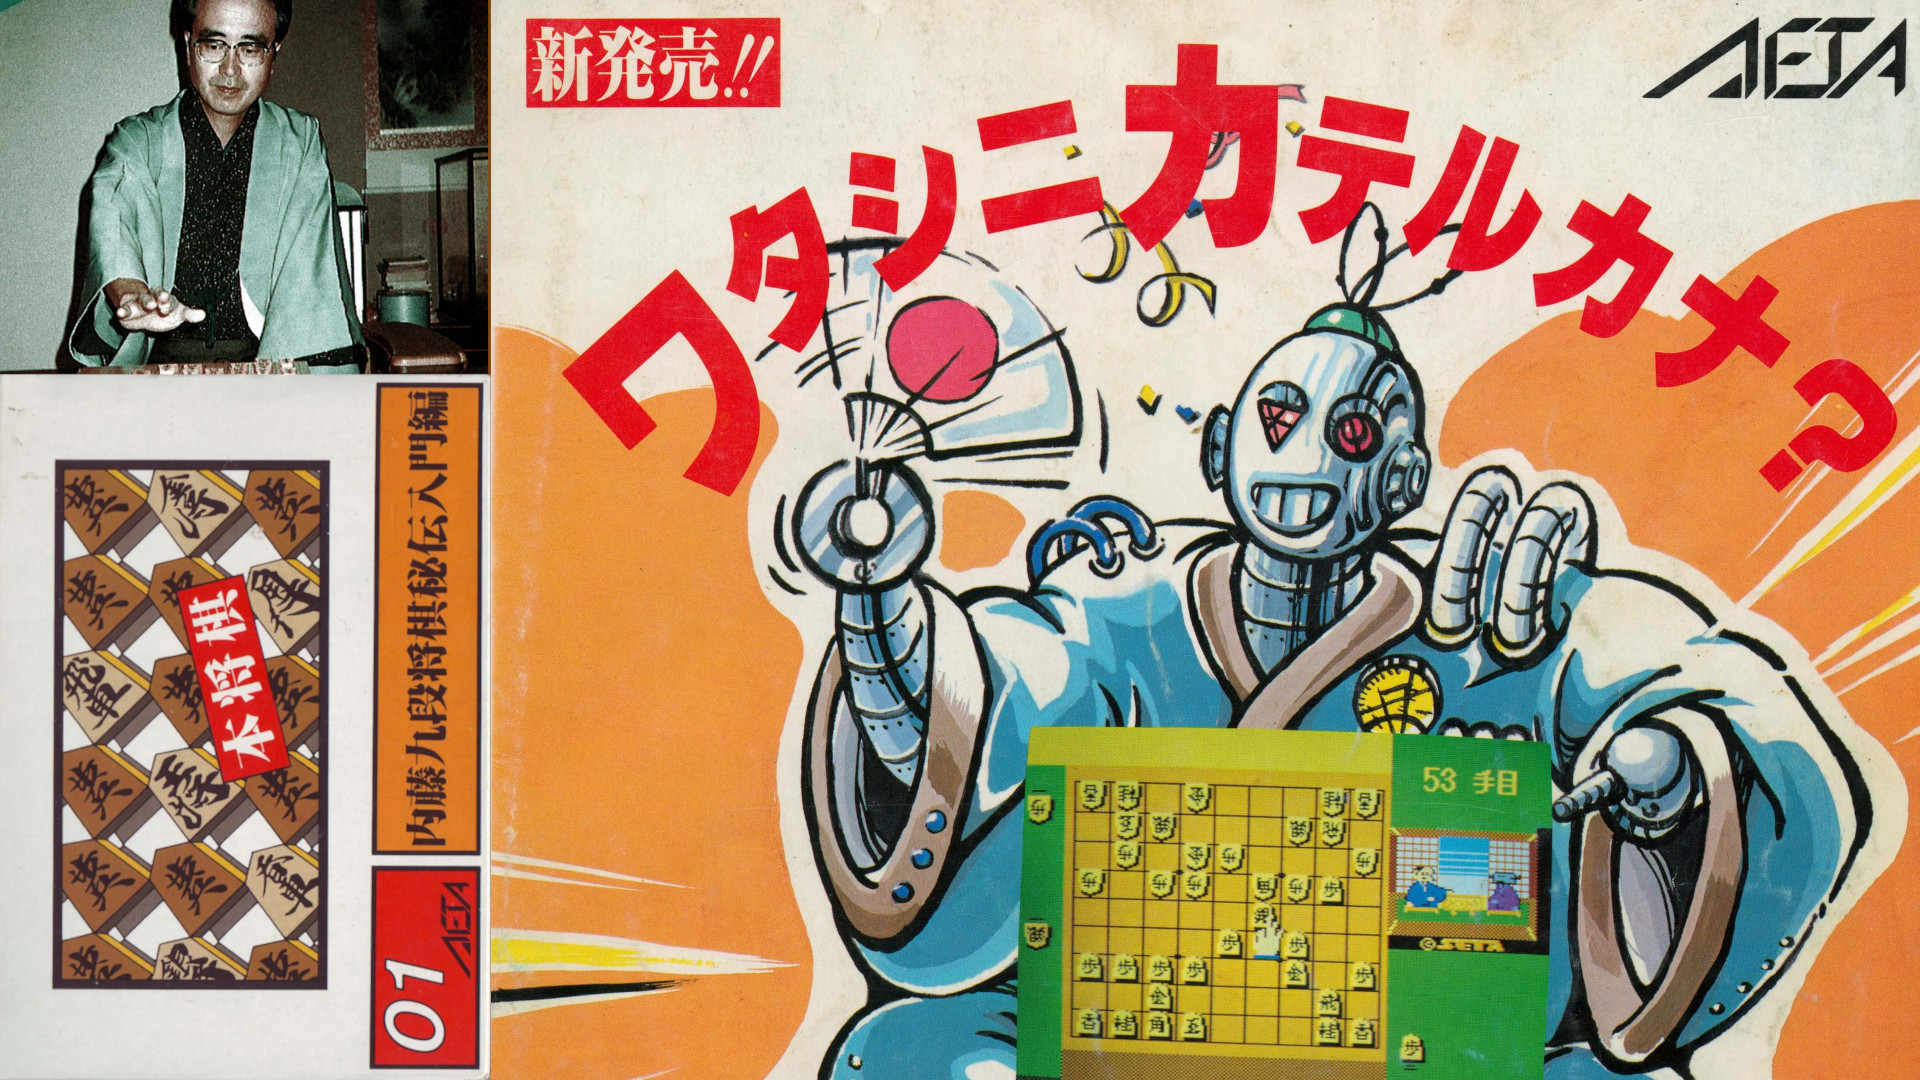 On the left Naitou 9-dan, on the right advertisement for the game